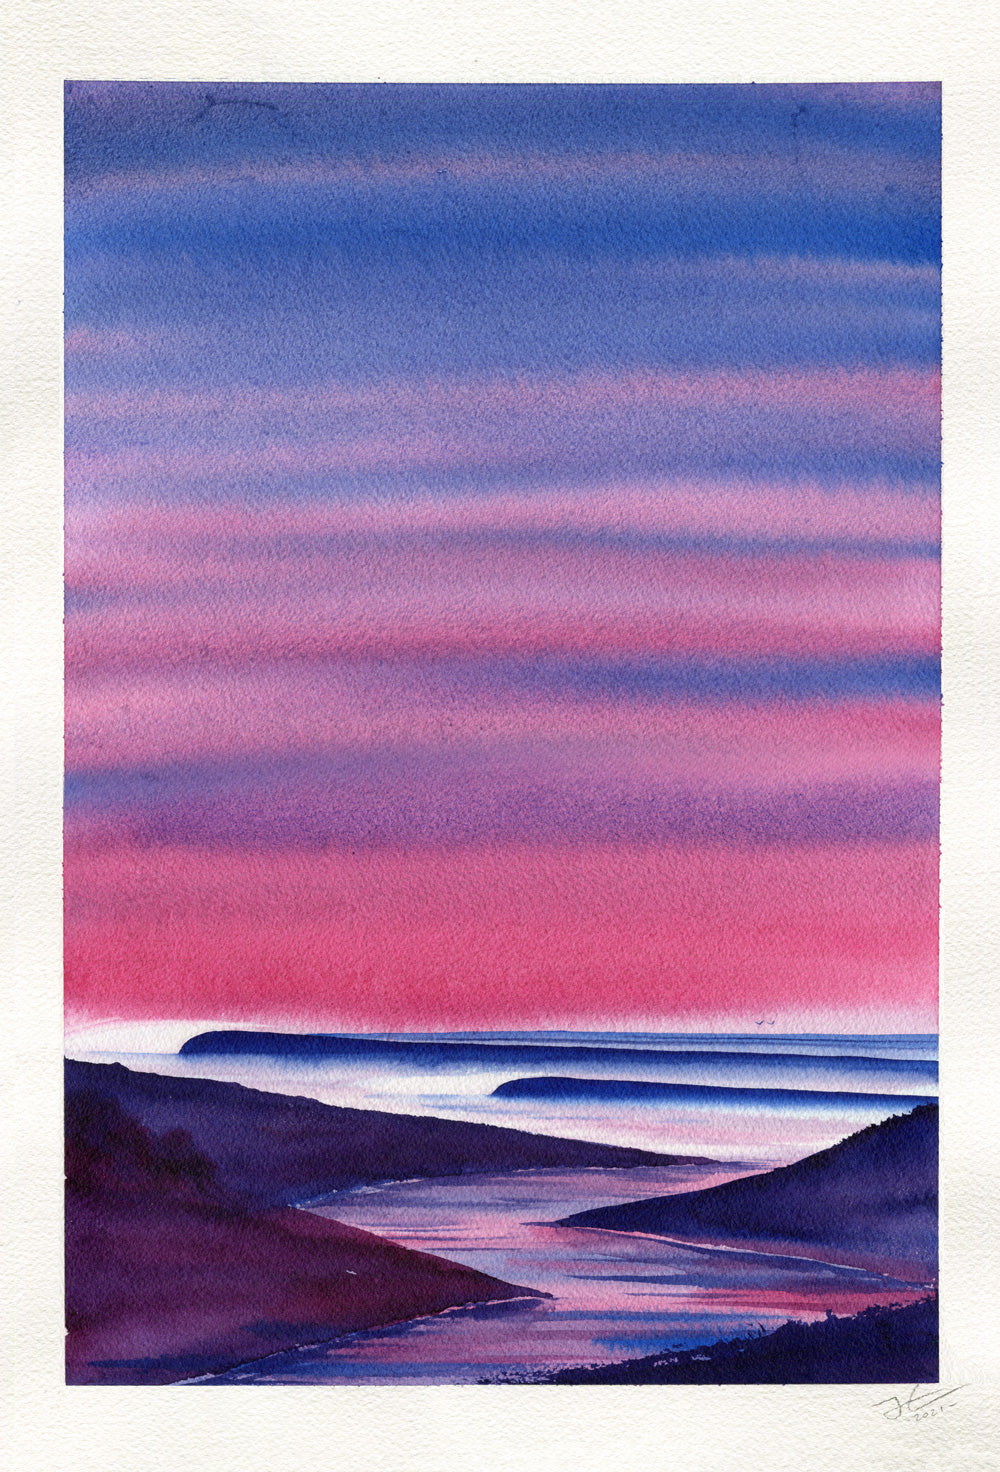 South Swell. Original signed illustration - SOLD OUT